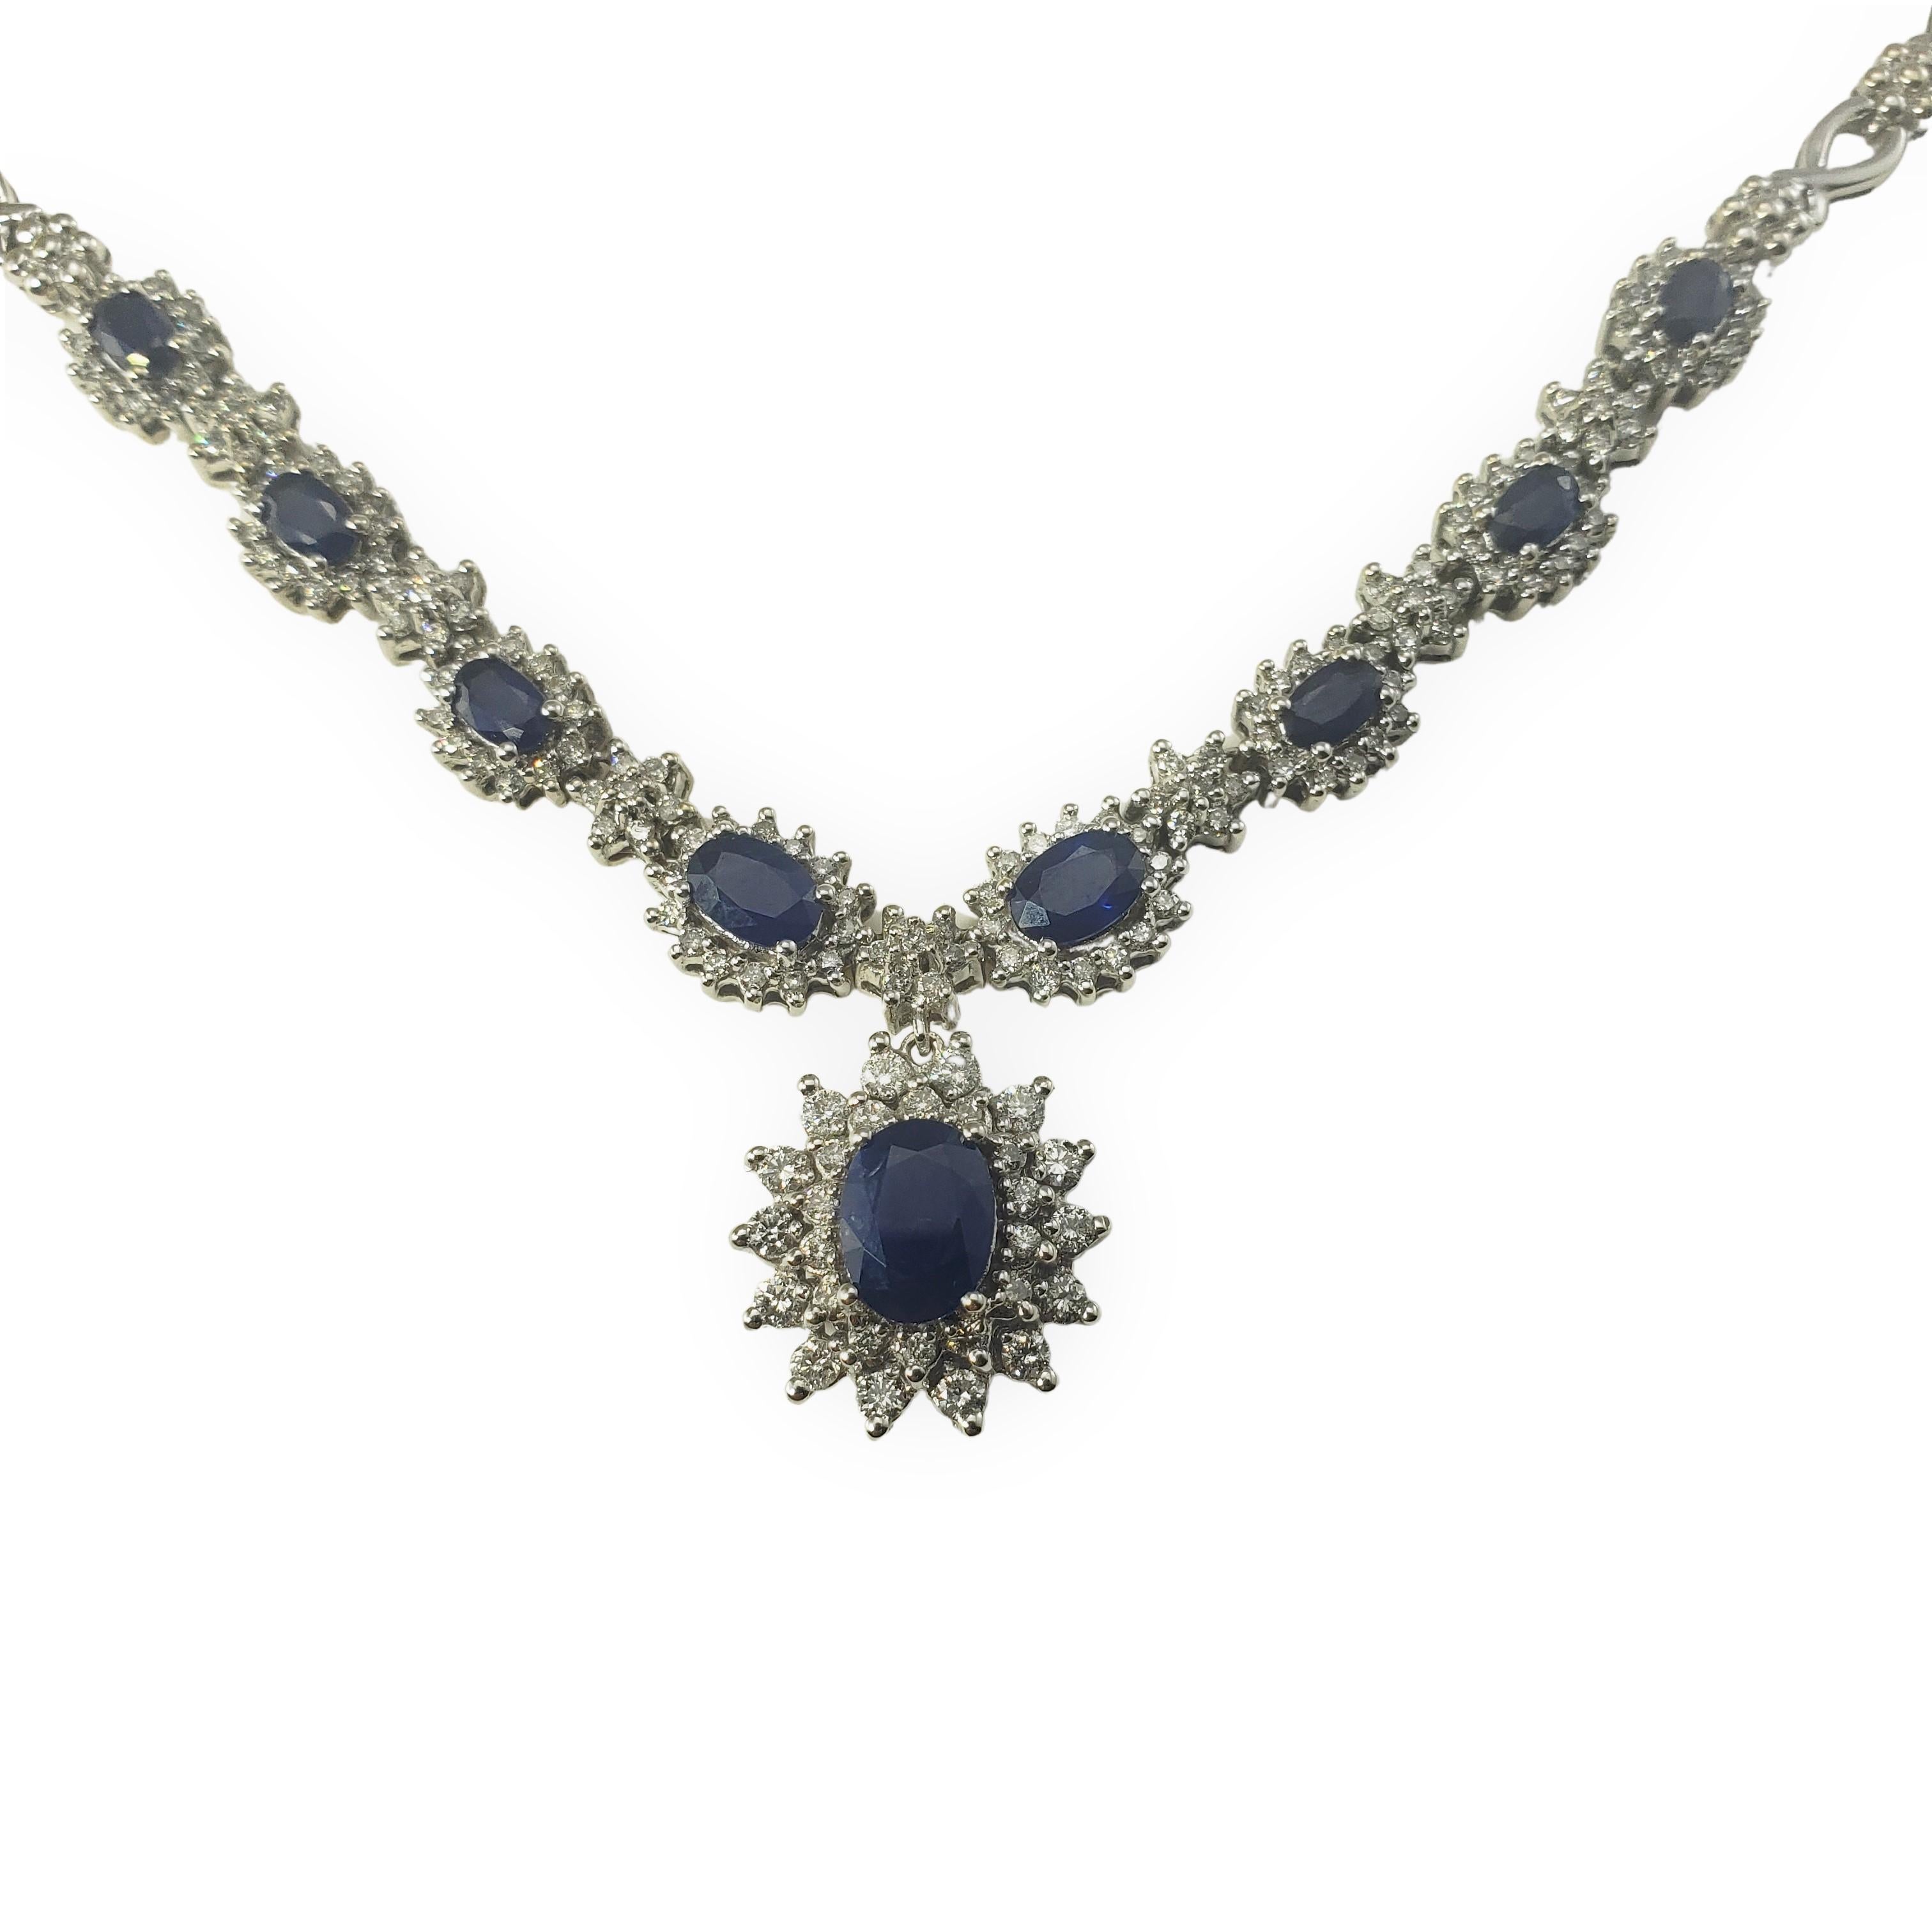 14 Karat White Gold Sapphire and Diamond Necklace-

This stunning necklace features nine oval sapphires and 176 round brilliant cut diamonds set in classic 14K white gold.  
Width: 4-8 mm.

Approximate sapphire total weight:  3.5 ct.

Approximate